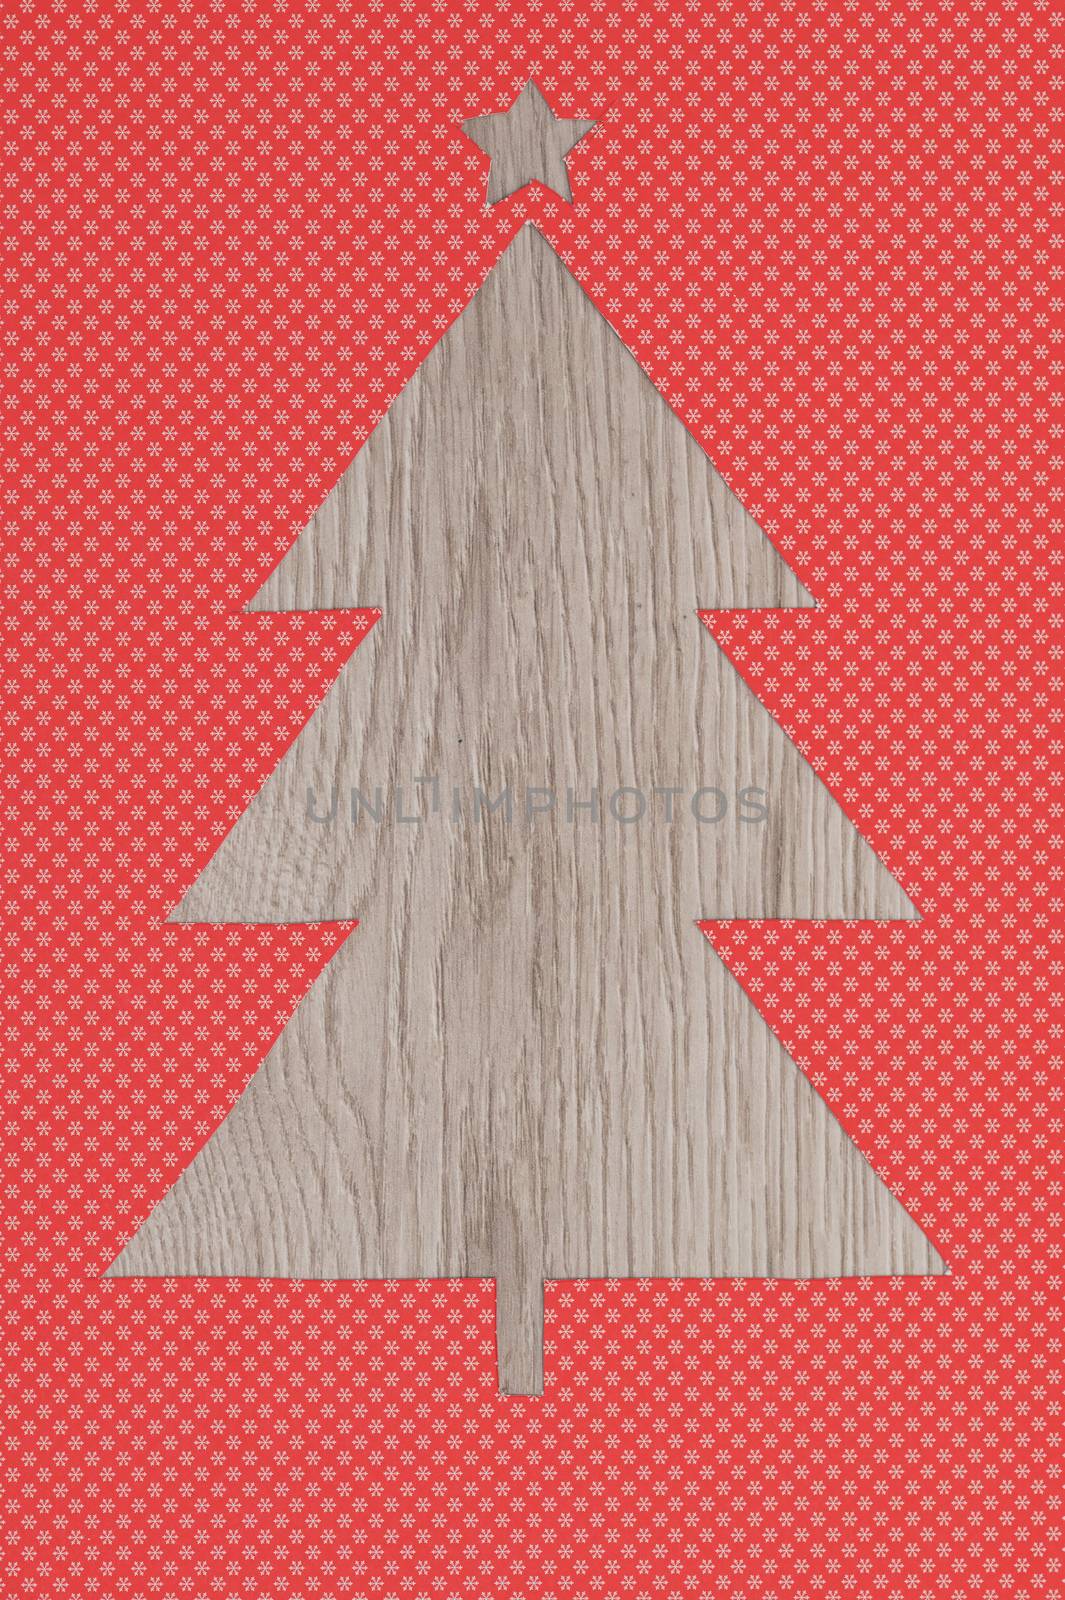 Christmas Tree Shape With Wooden Background by jordachelr